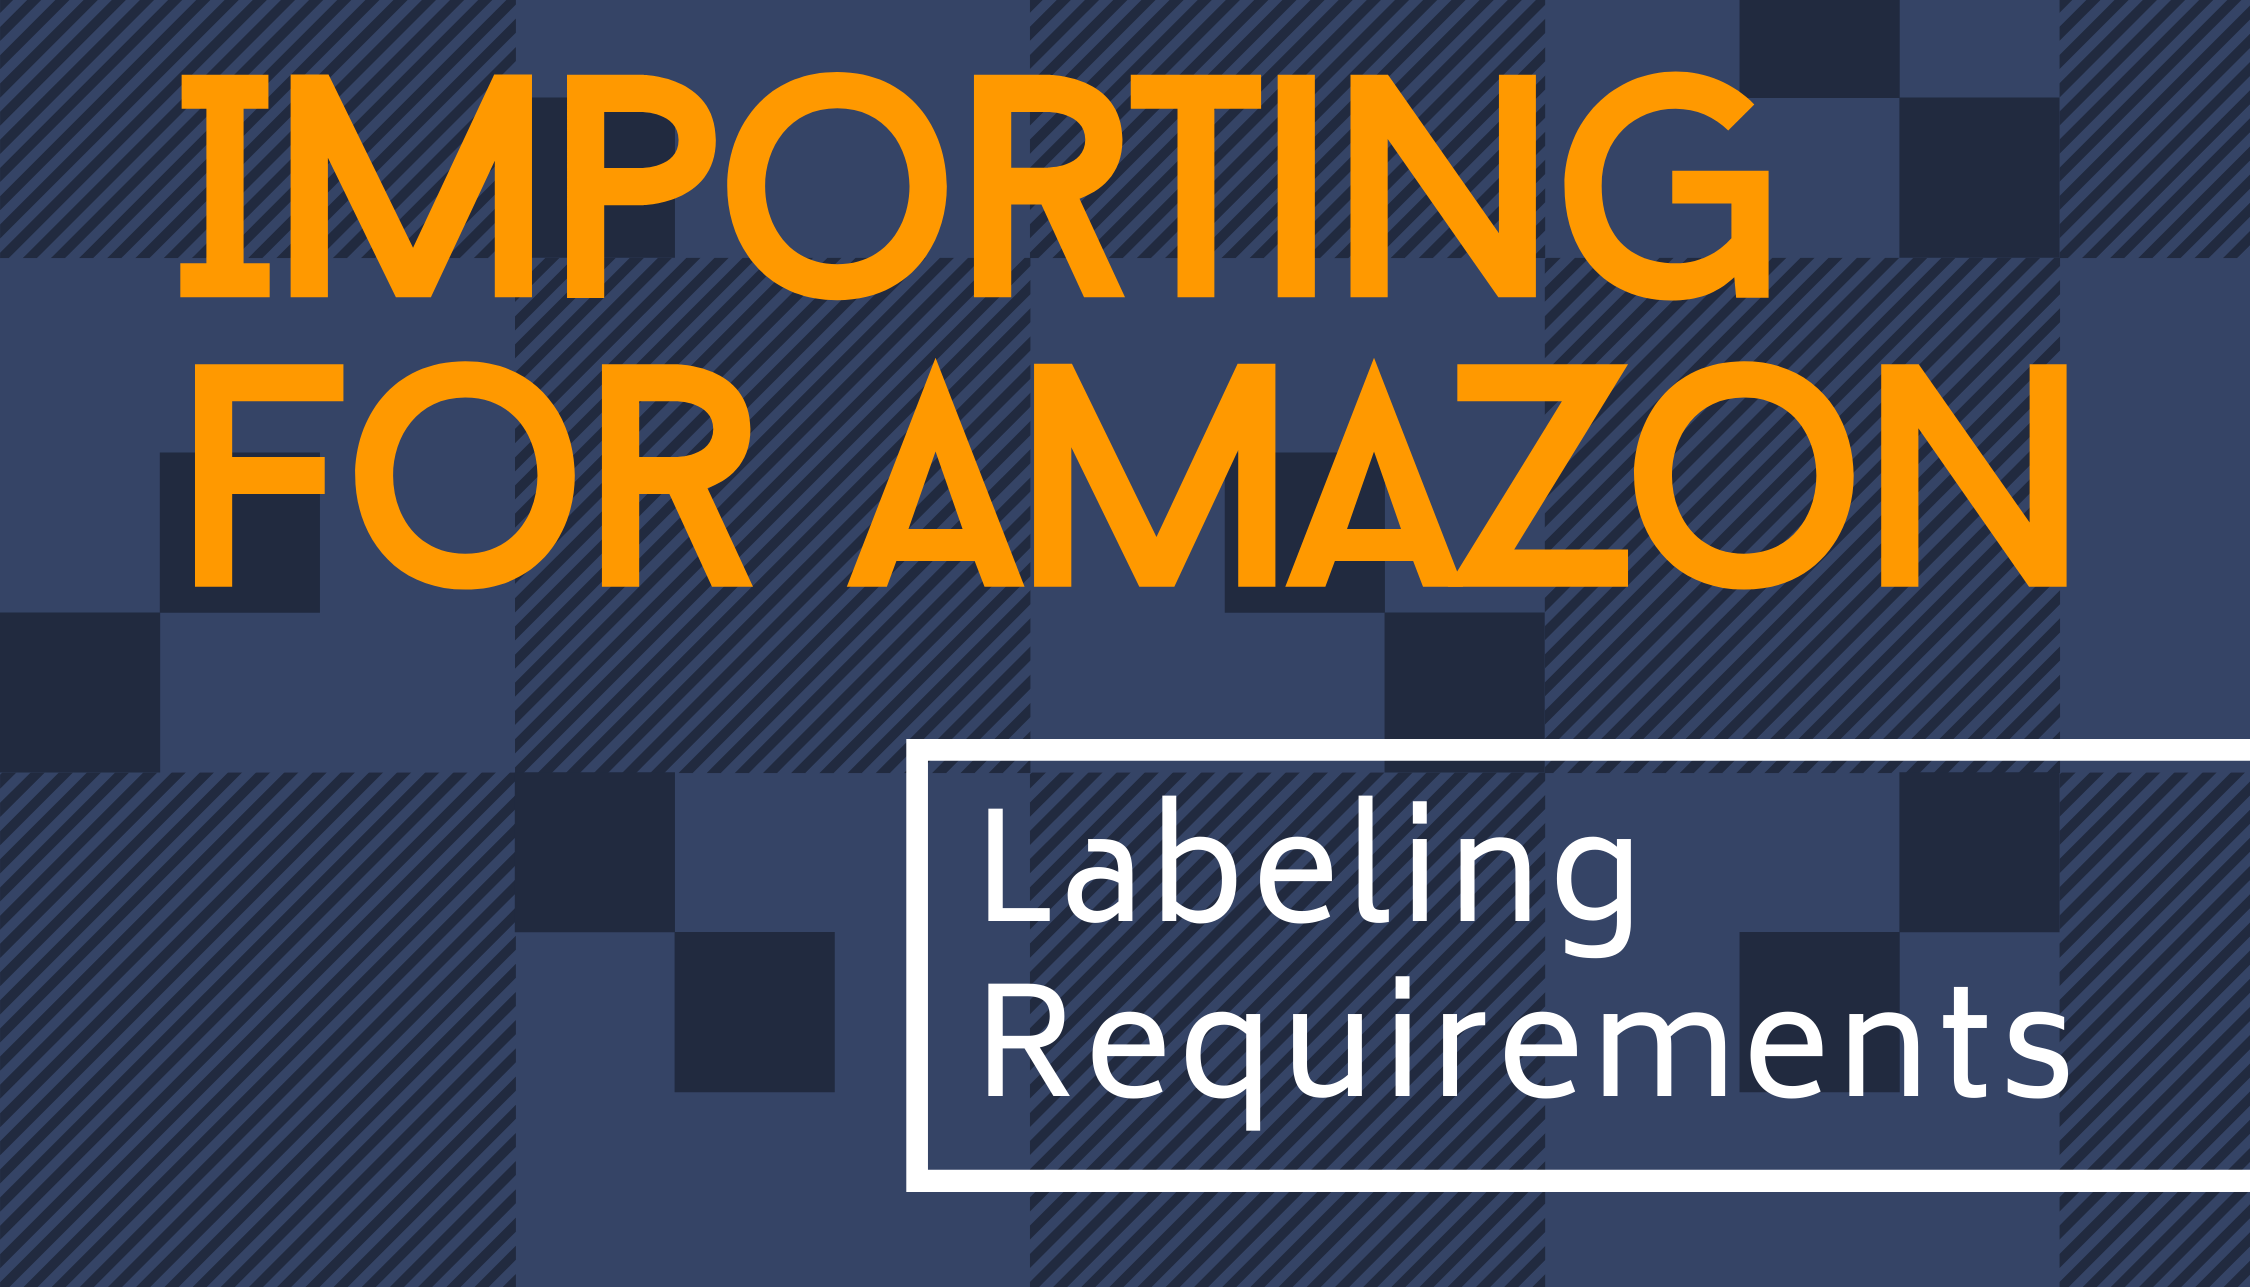 Importing for Amazon: Labeling Requirements